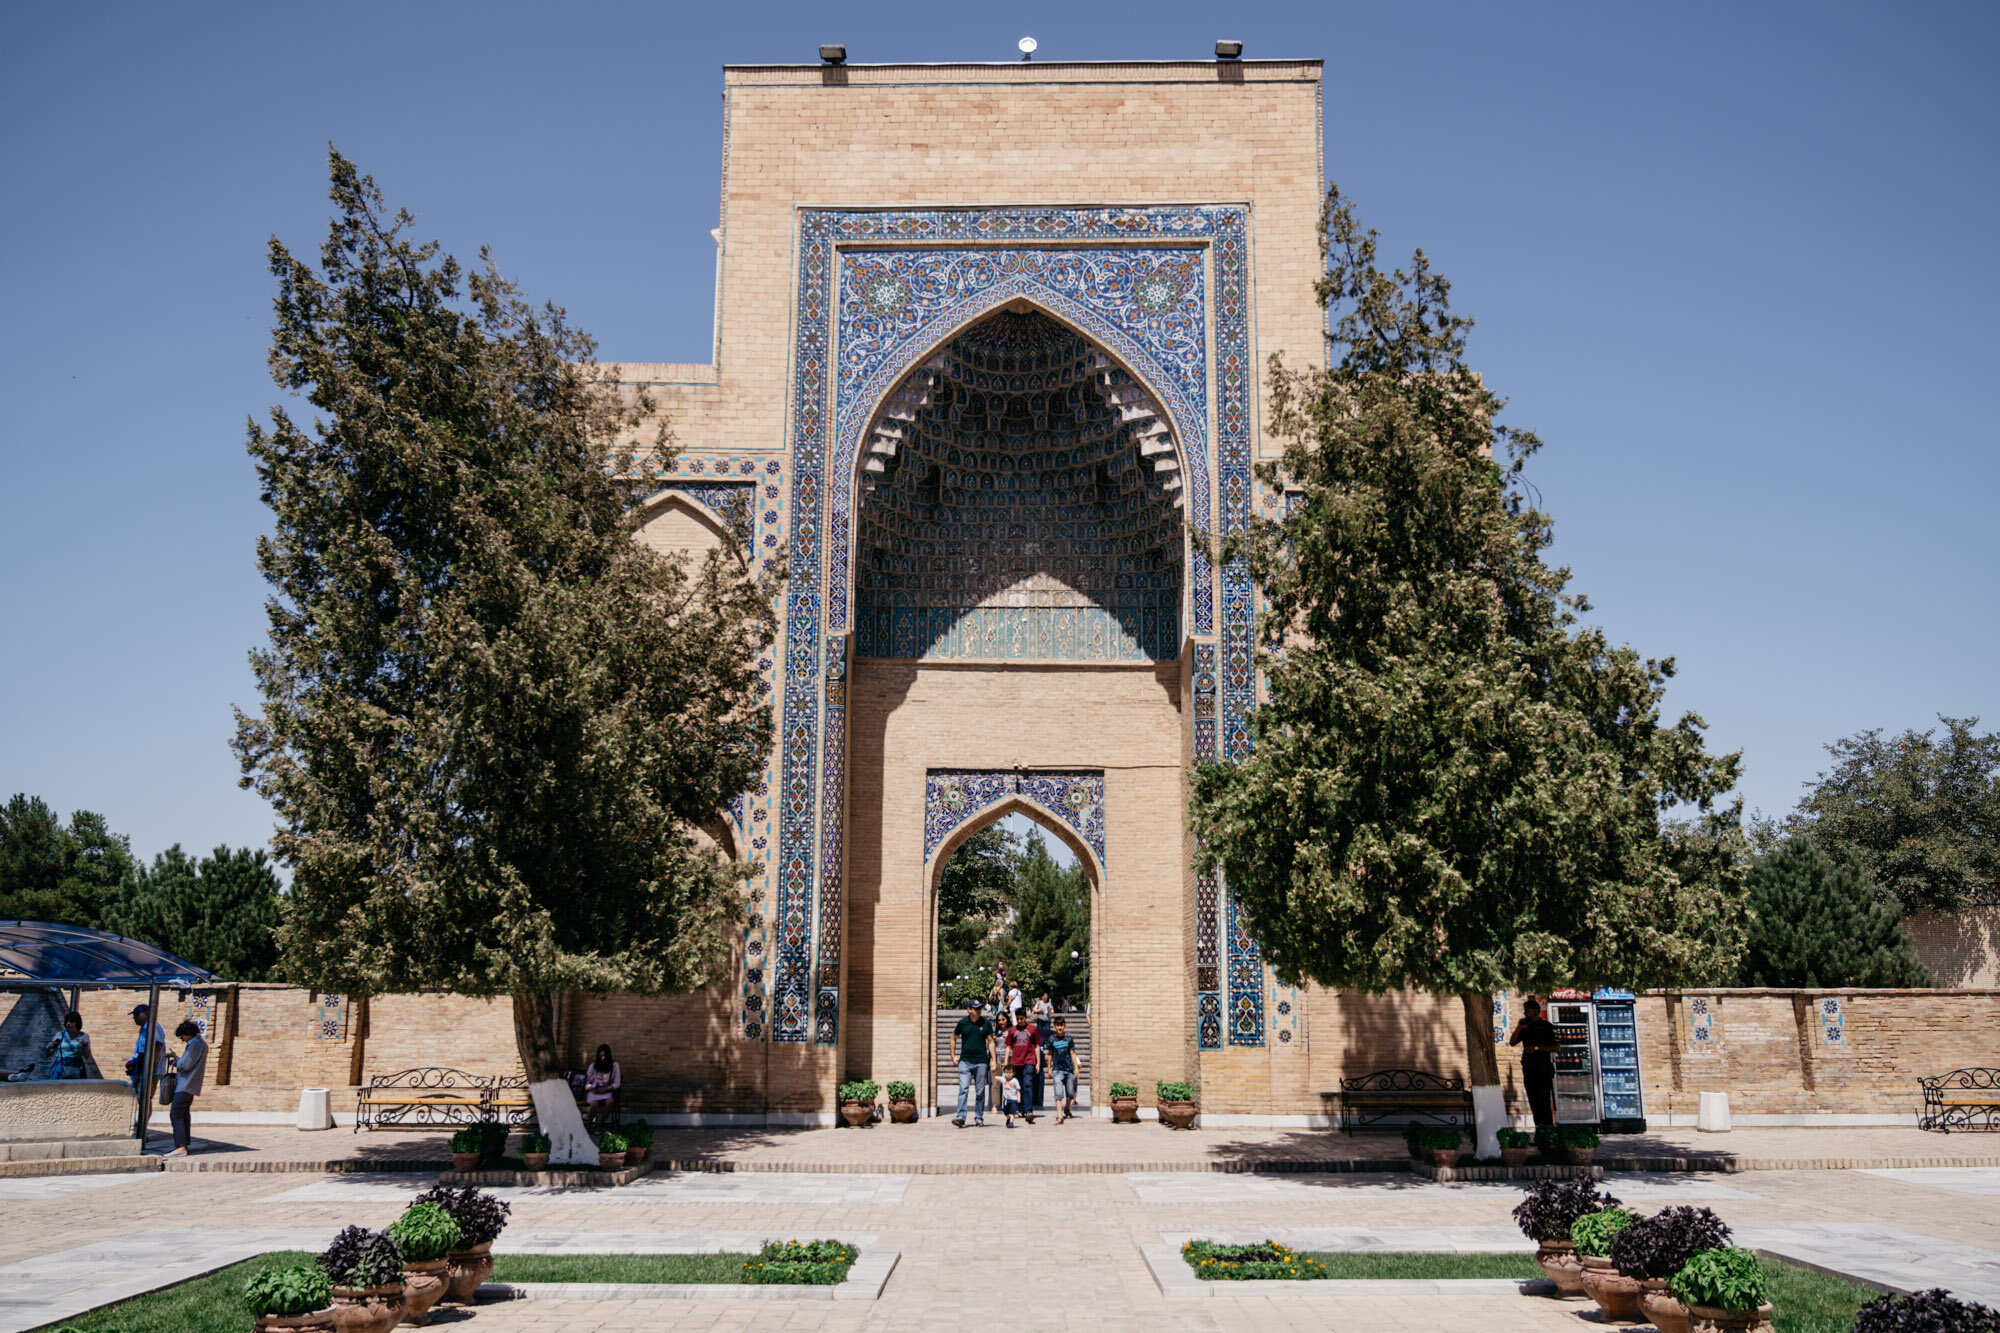  The gateway entrance to the mausoleum 